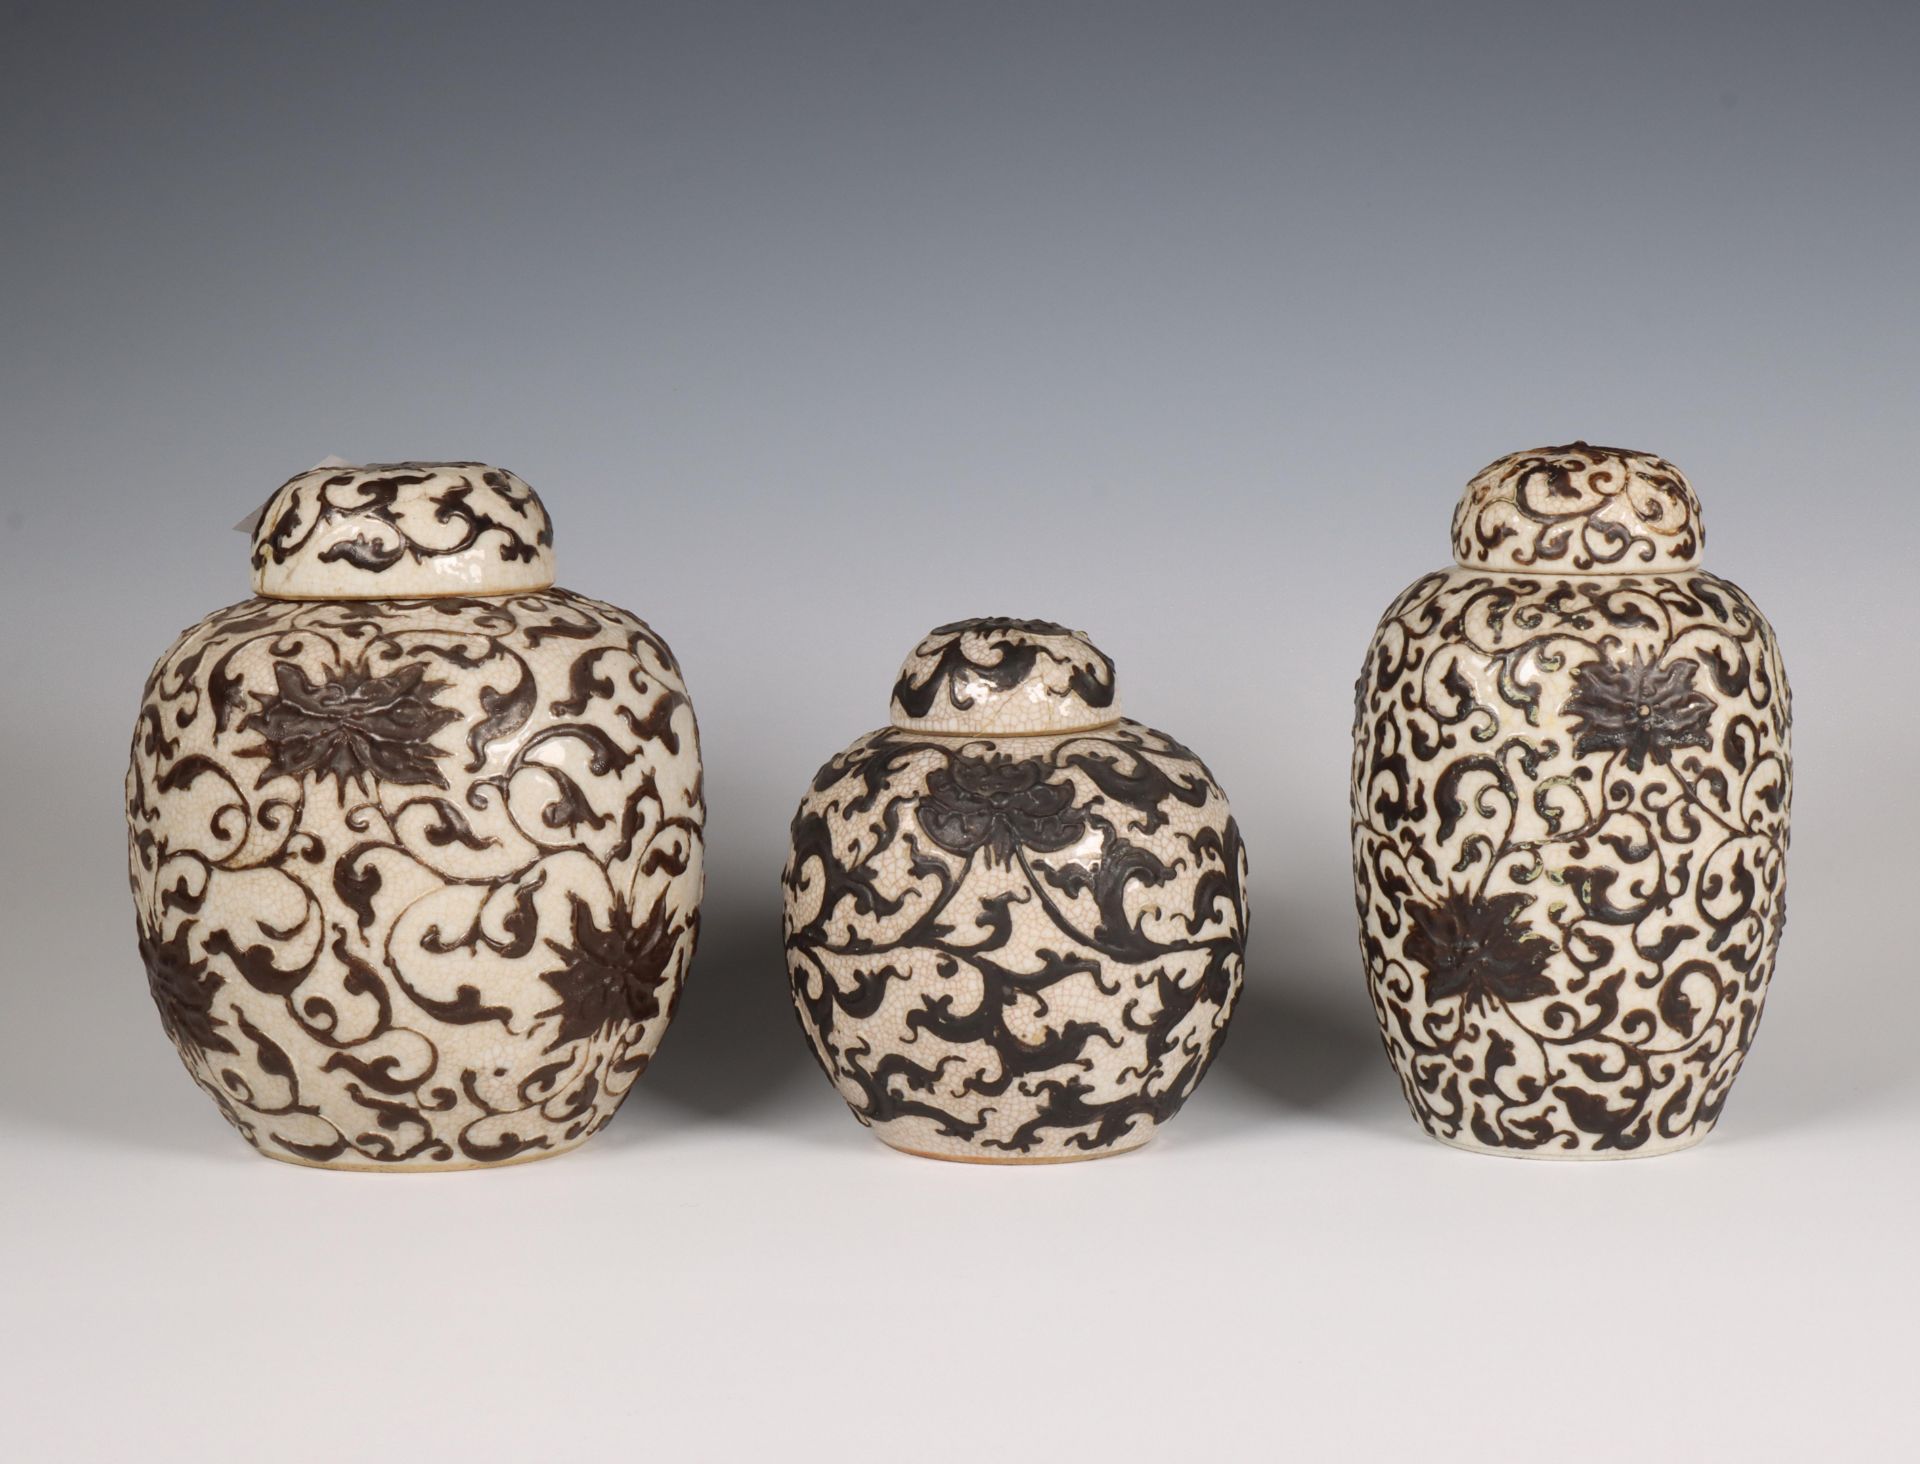 China, three crackle-glazed 'lotus' ginger jars and covers, 19th century,